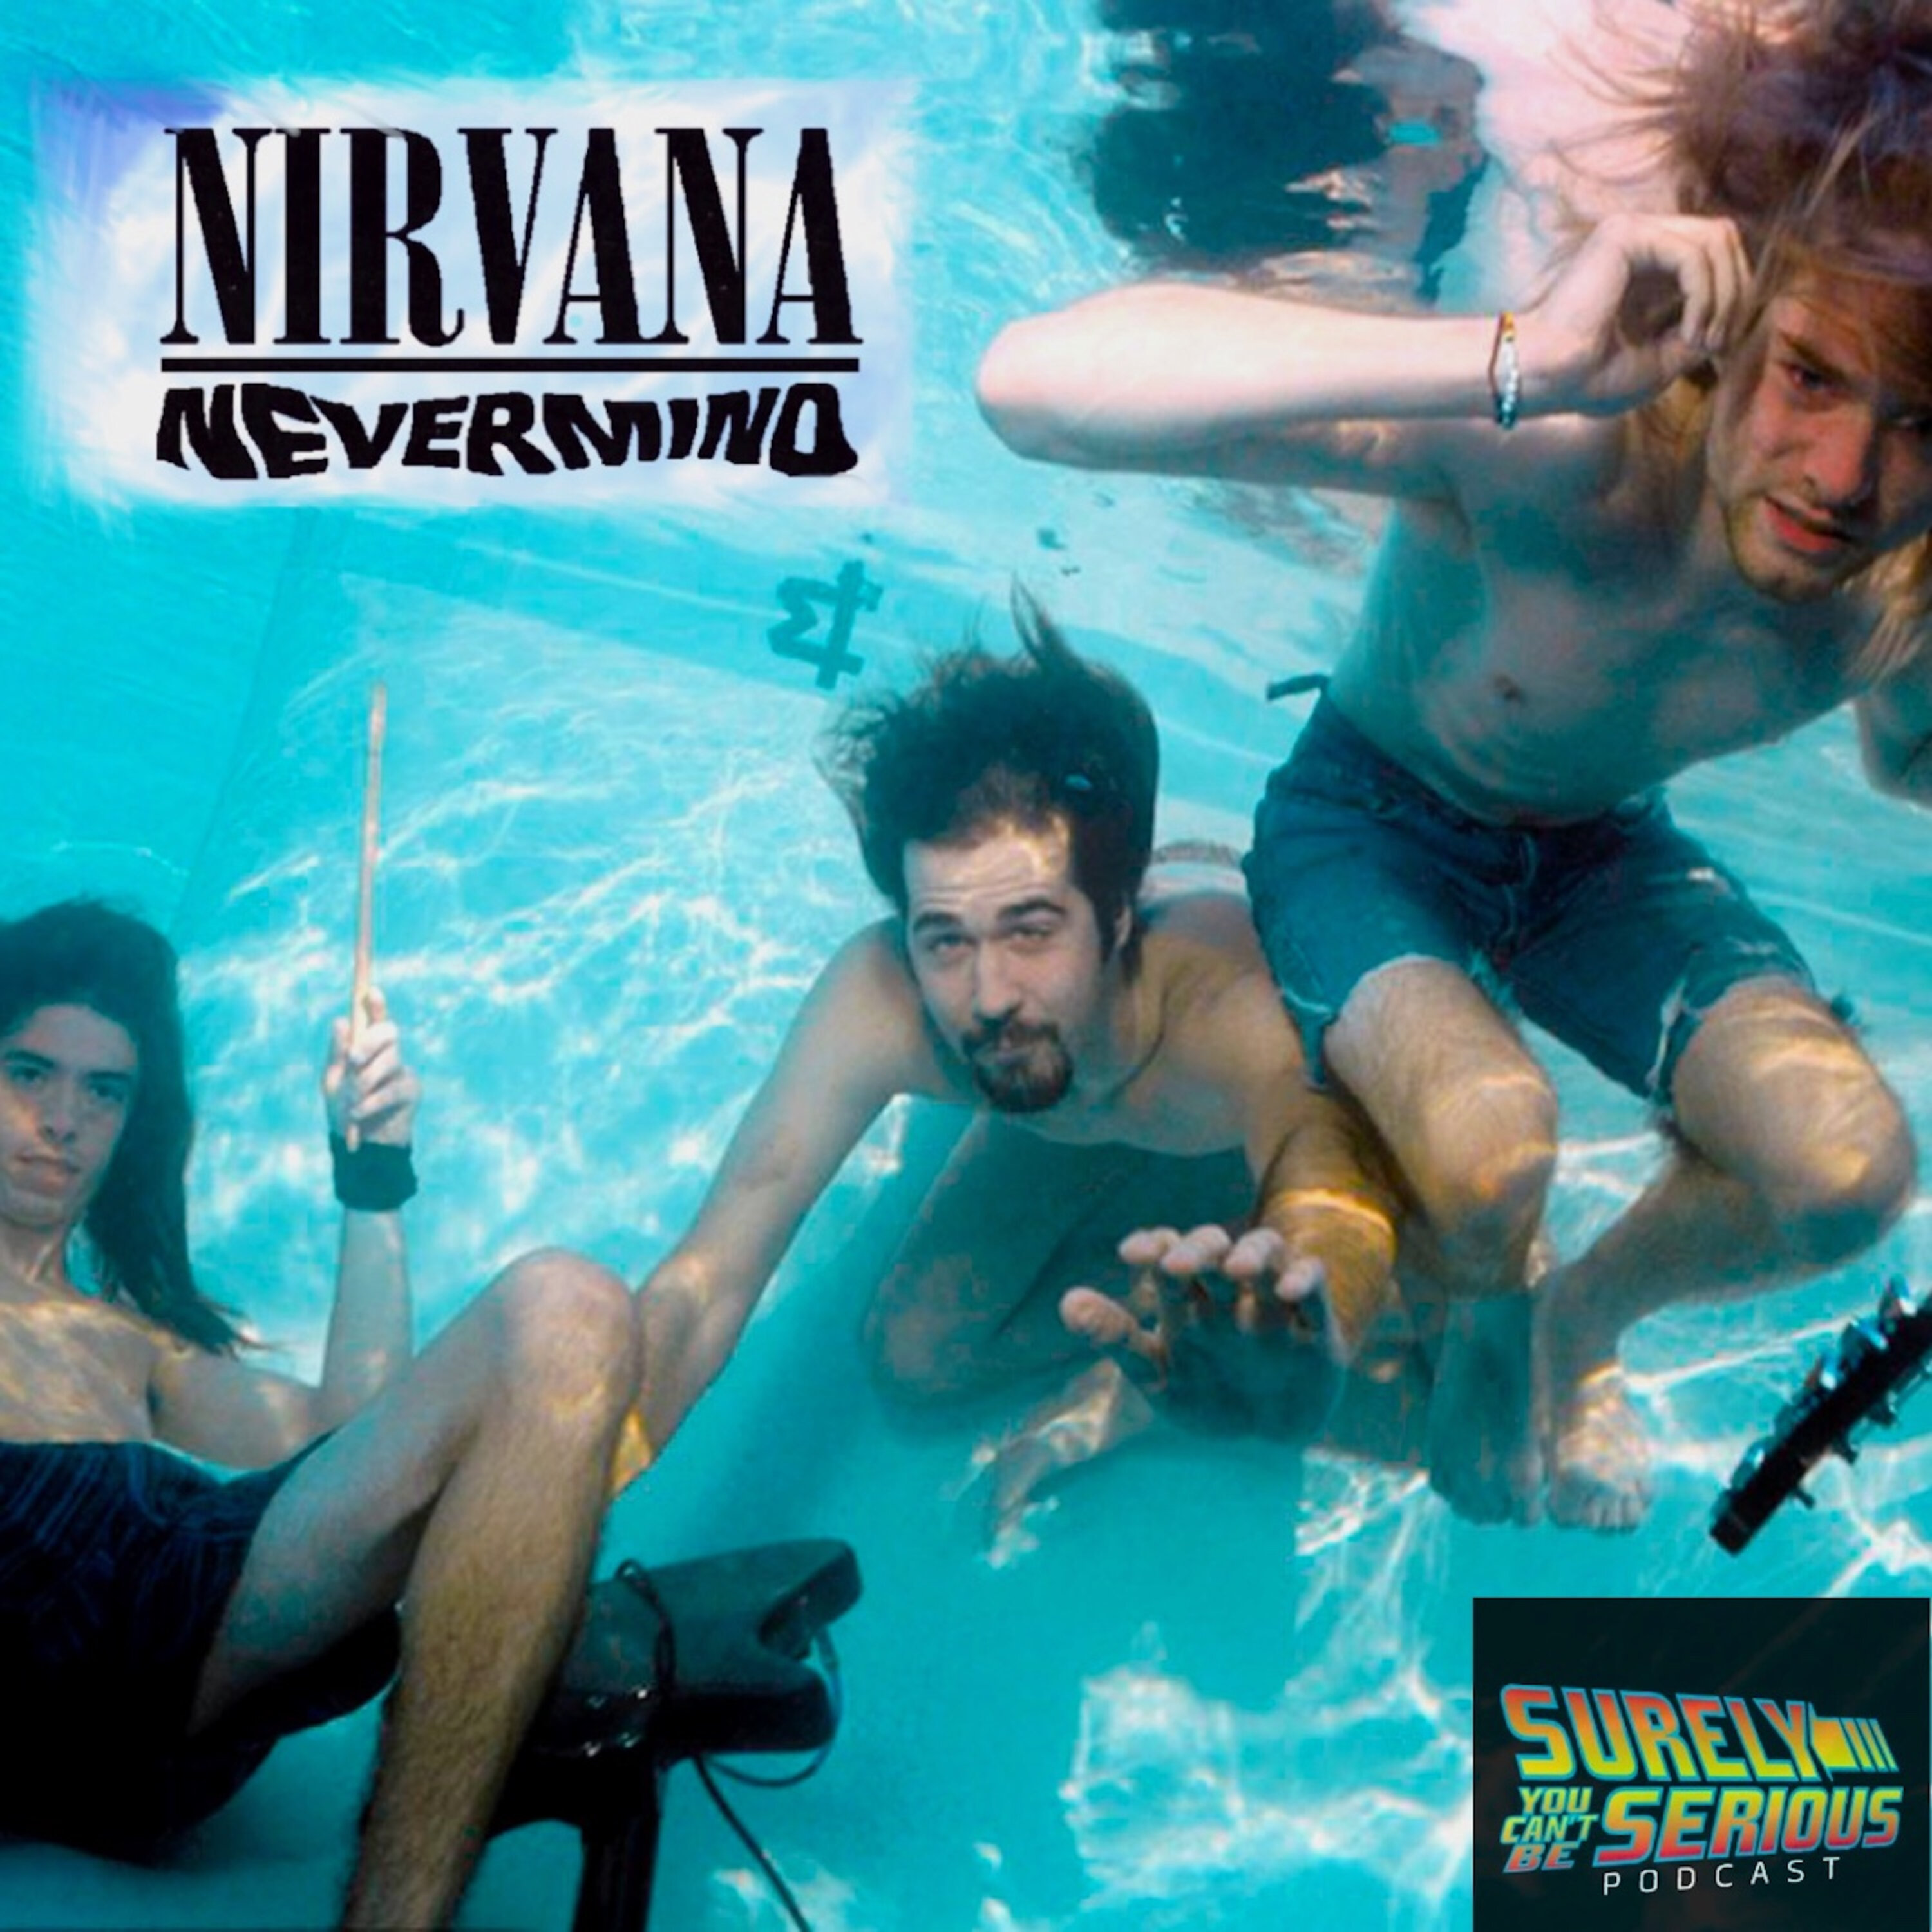 The History of Nirvana and Nevermind Track by Track Image